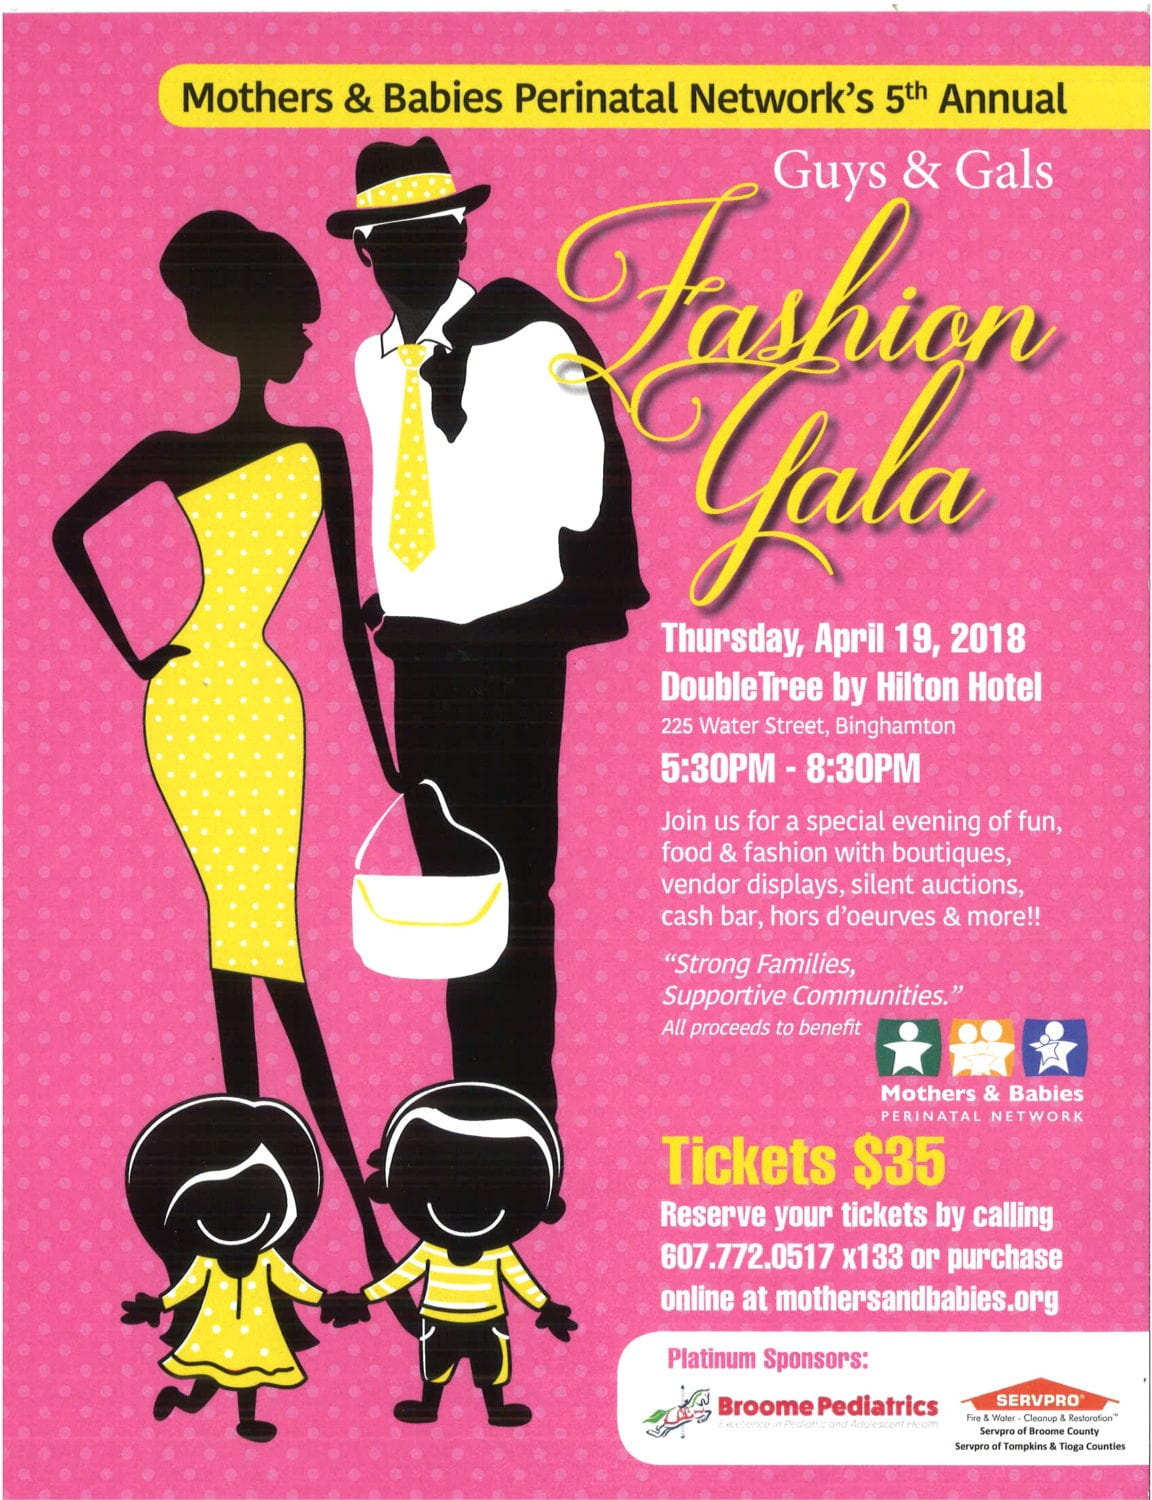 In the Community: Support the Mothers and Babies Fashion Gala on April 19